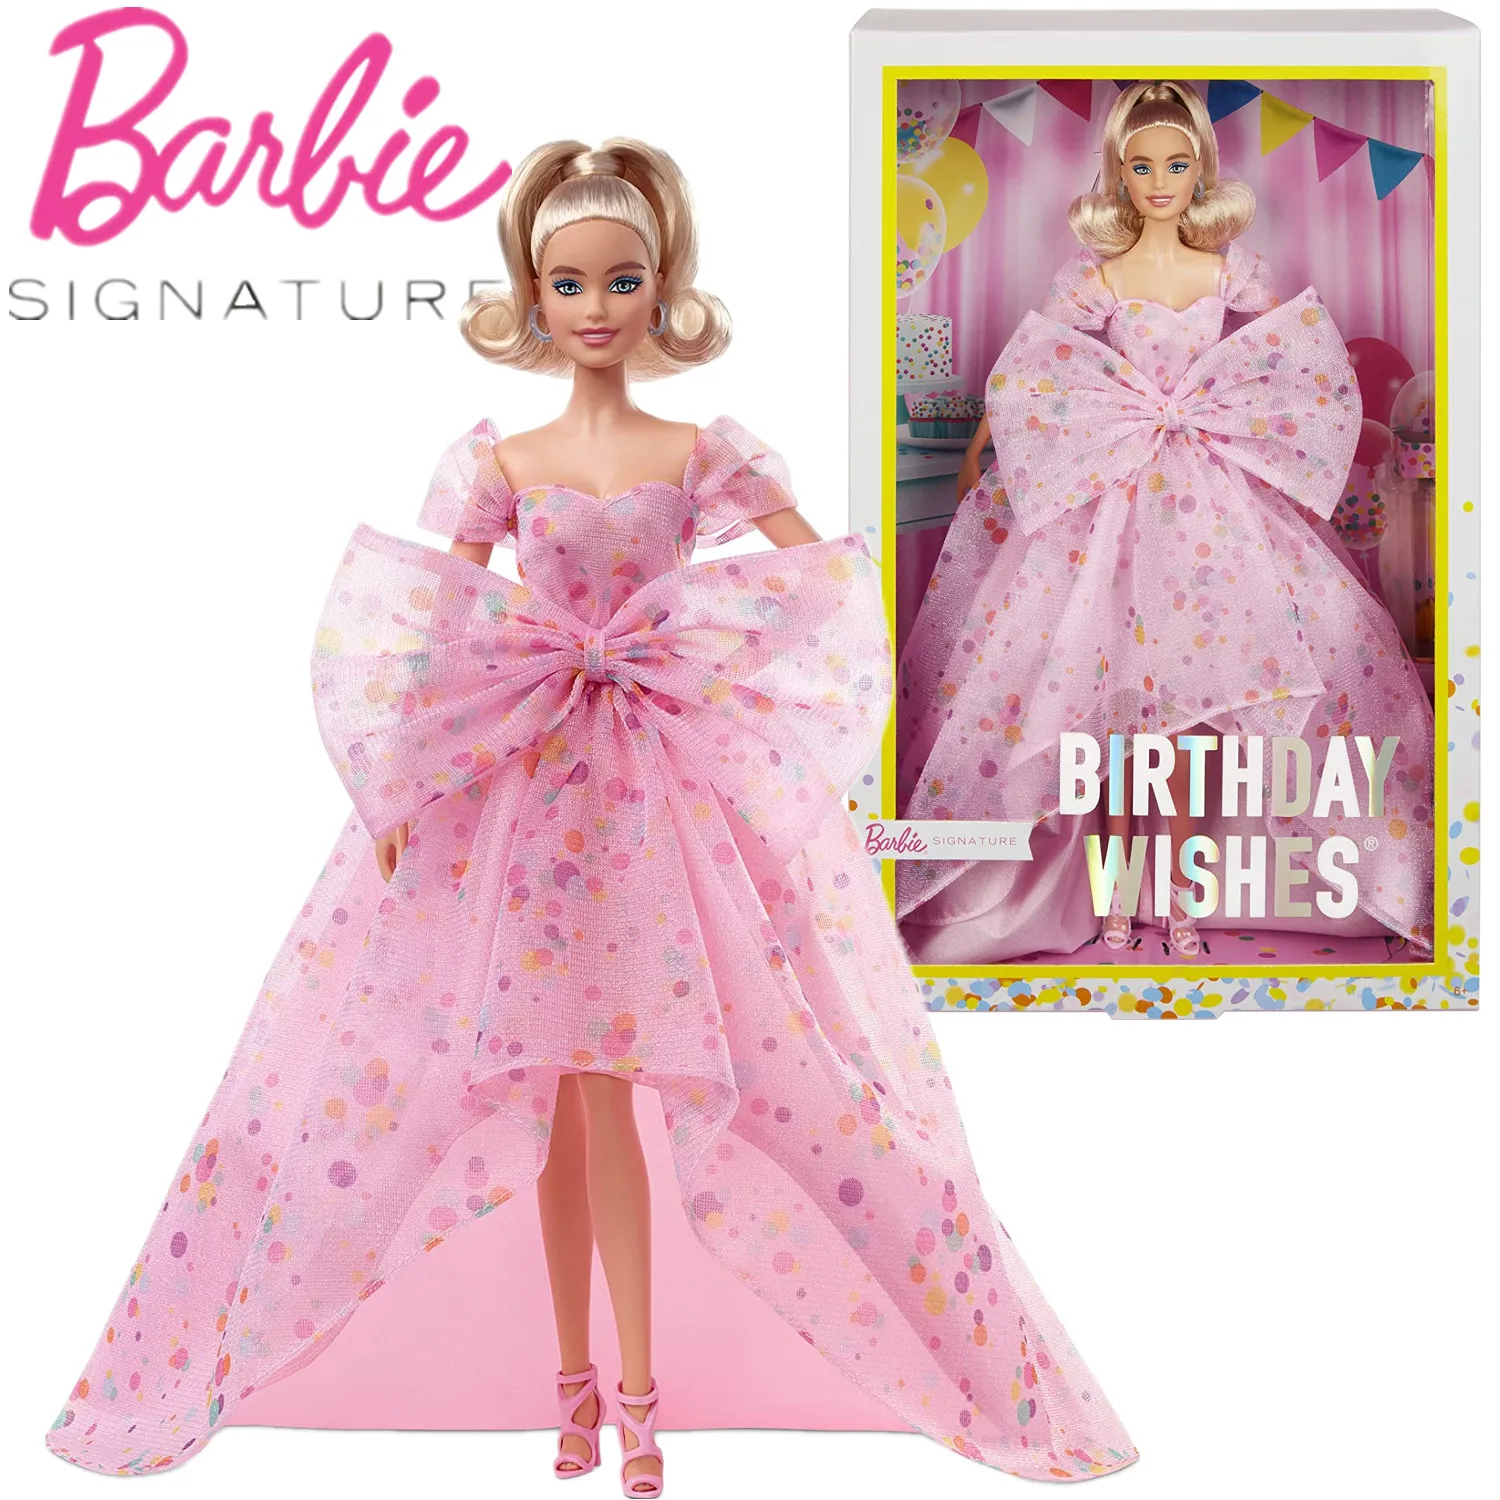 

Barbie Birthday Wishes Doll Barbie Signature 2022 Collector's Edition Dolls Toys Fashion Model Girls Birthday Toy Gift HCB89